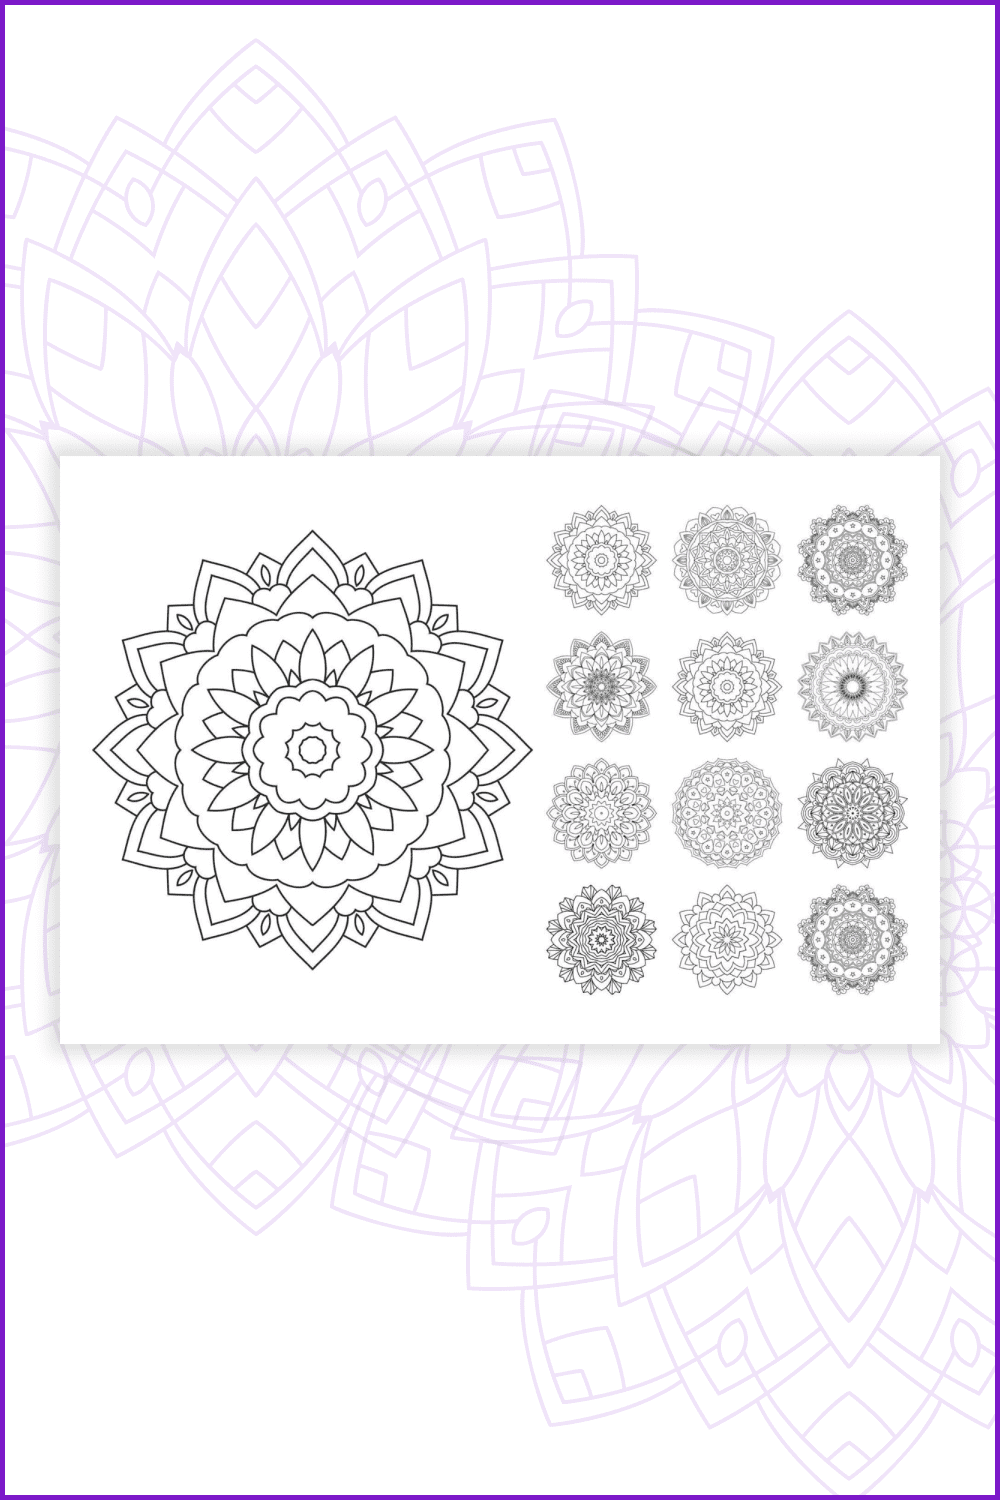 Collage with floral style mandalas.